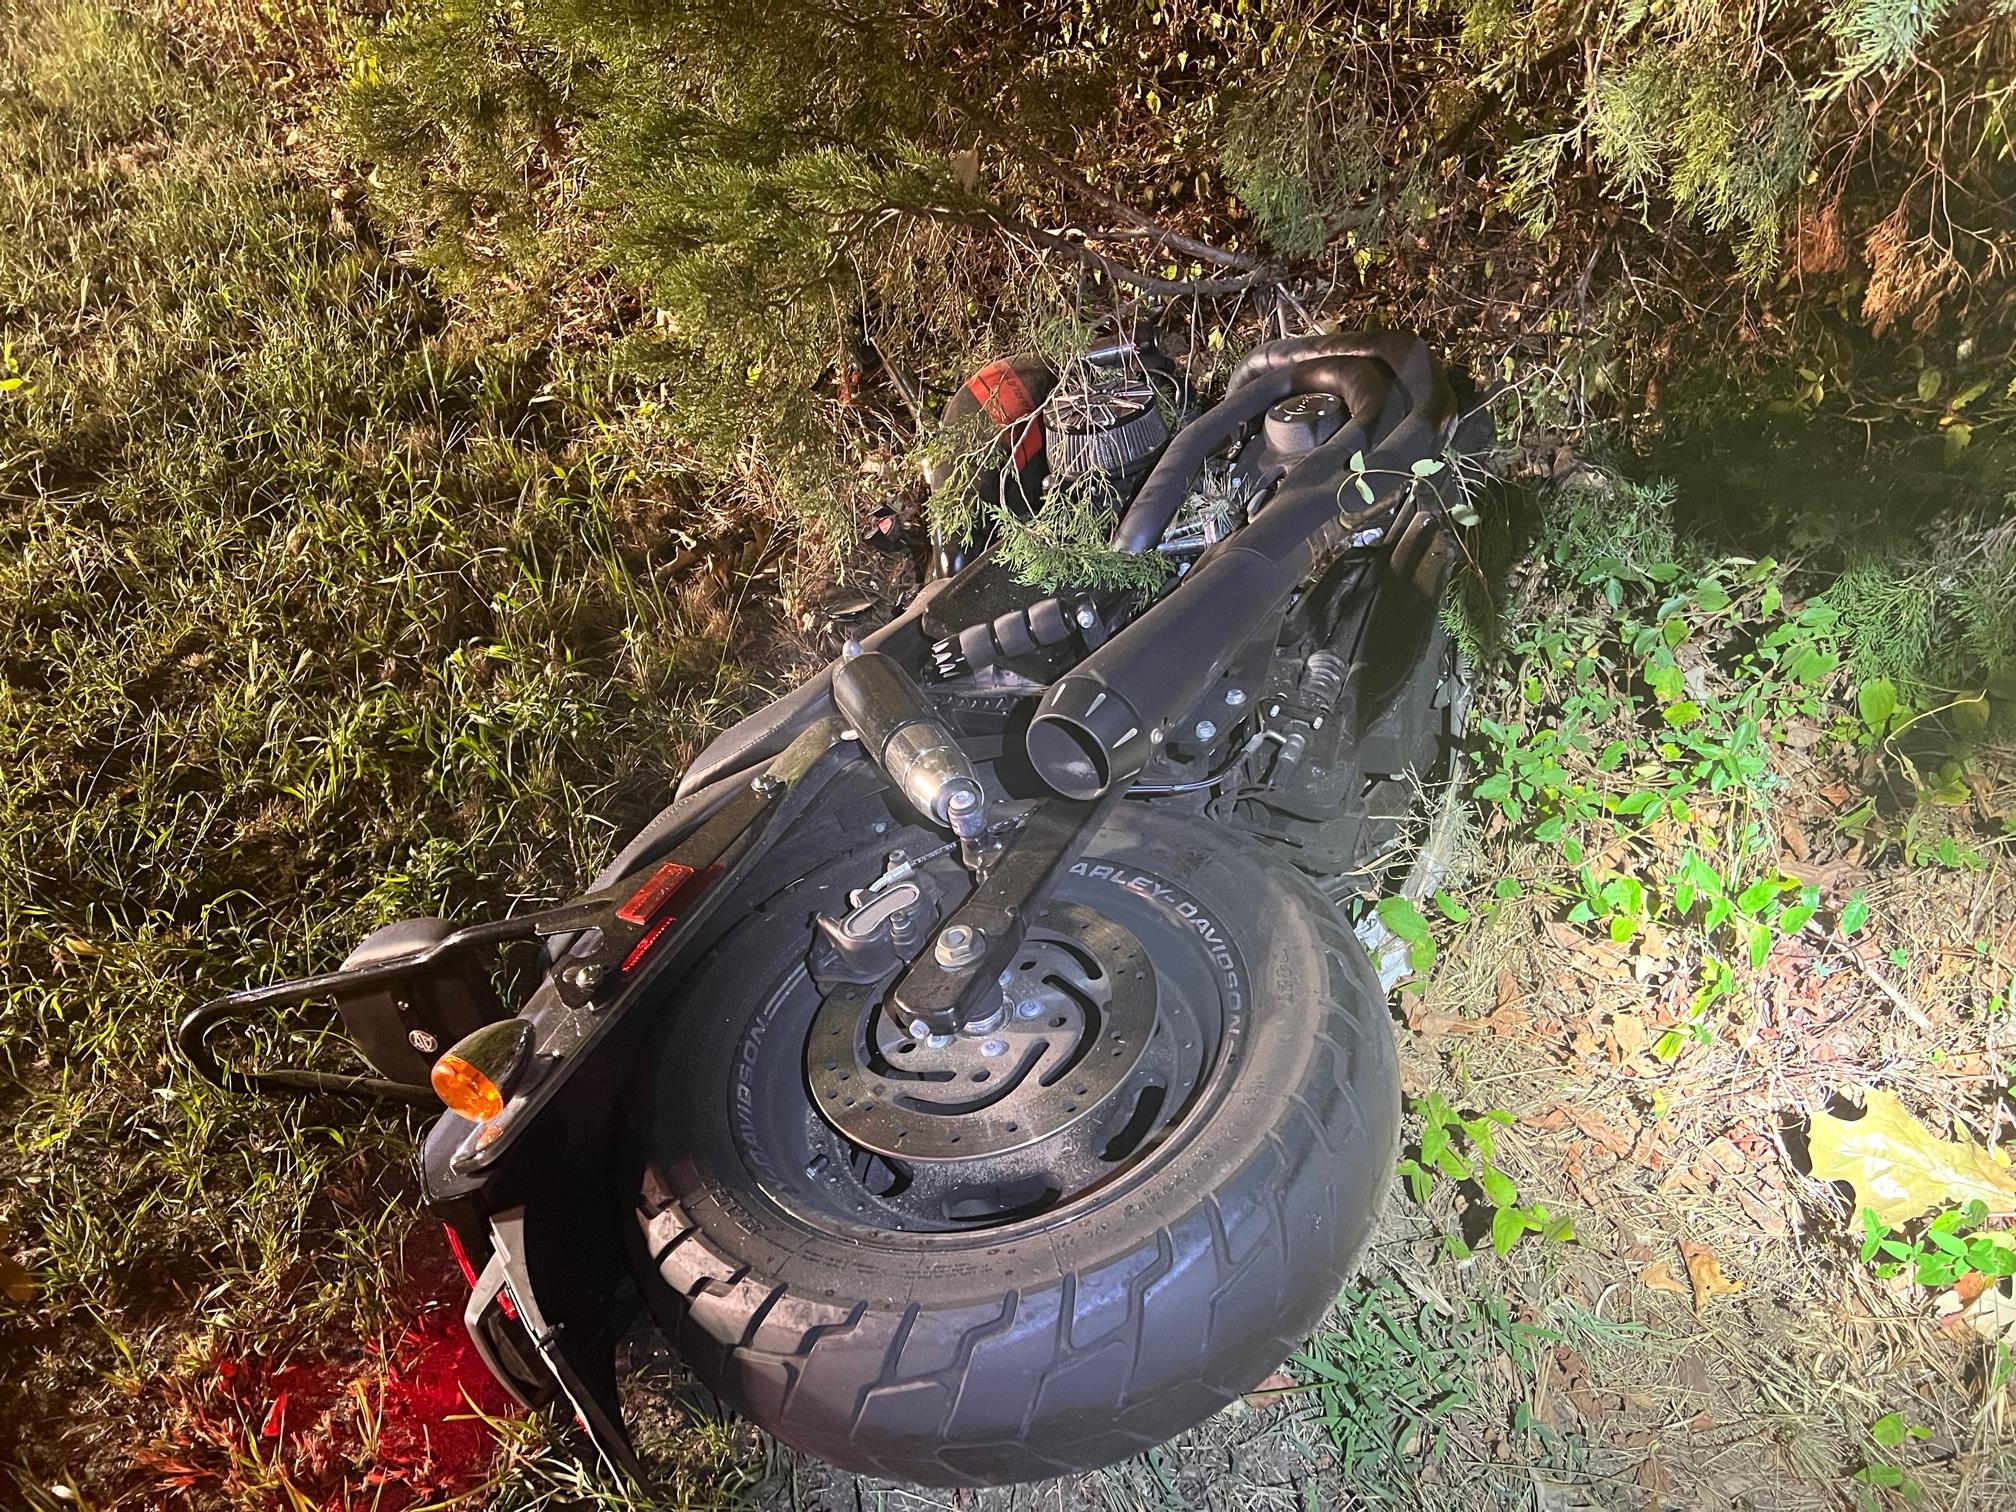 A Sept. 5, 2022 accident involving a motorcycle and a Dodger Challenger. (Credit: Manchester Twp. Police)